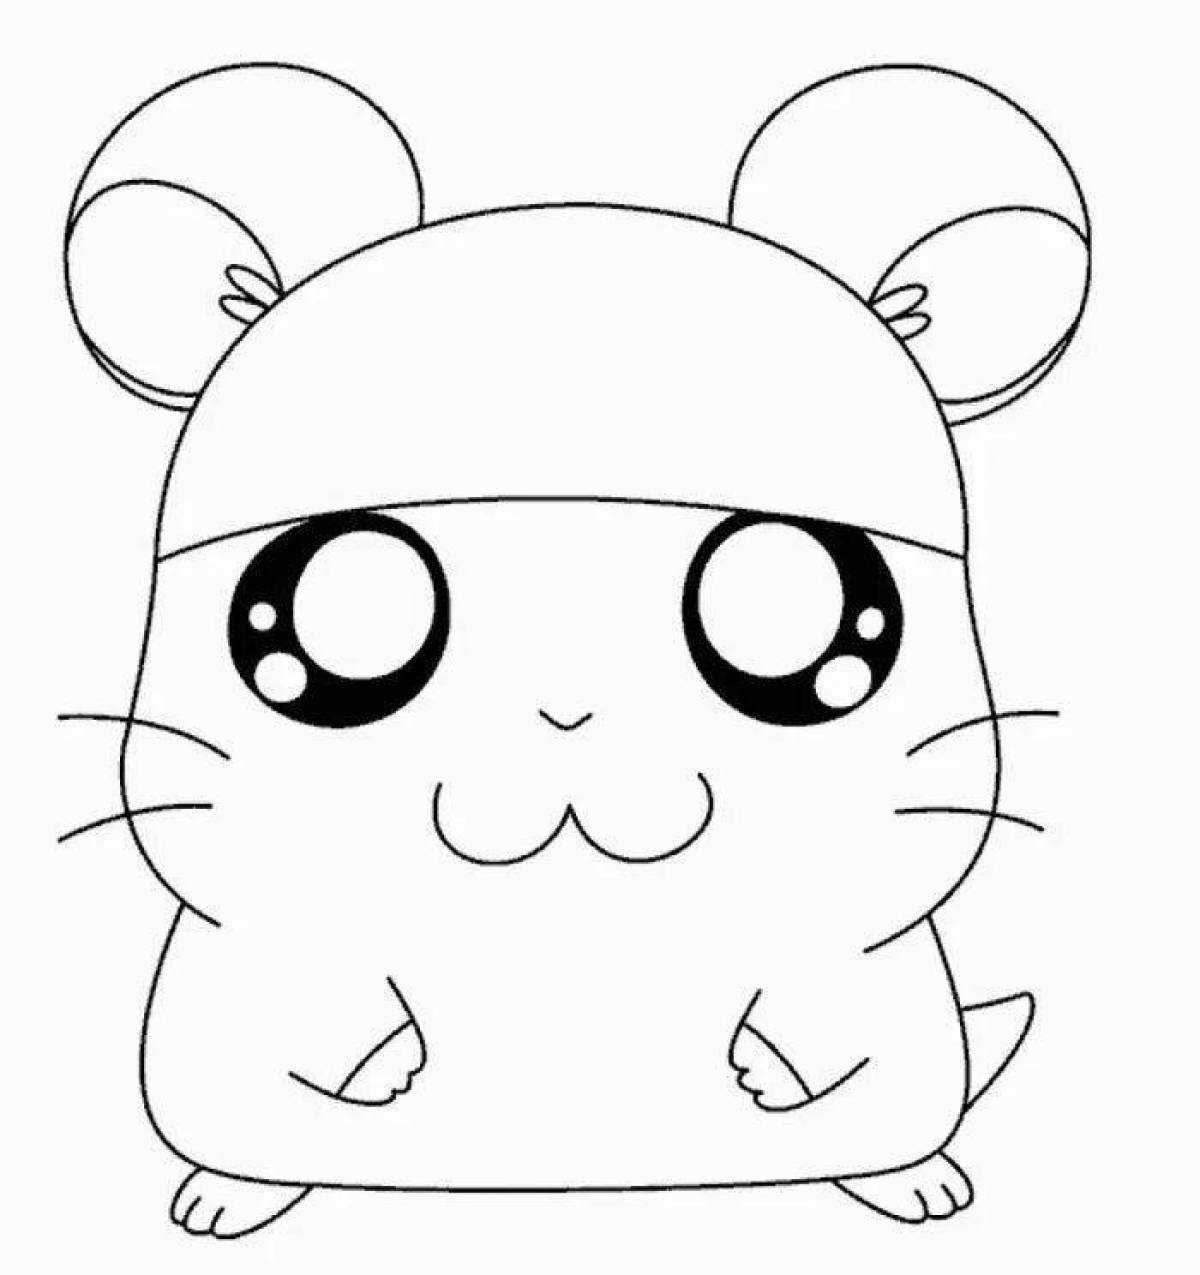 Coloring pages snuggable hamsters